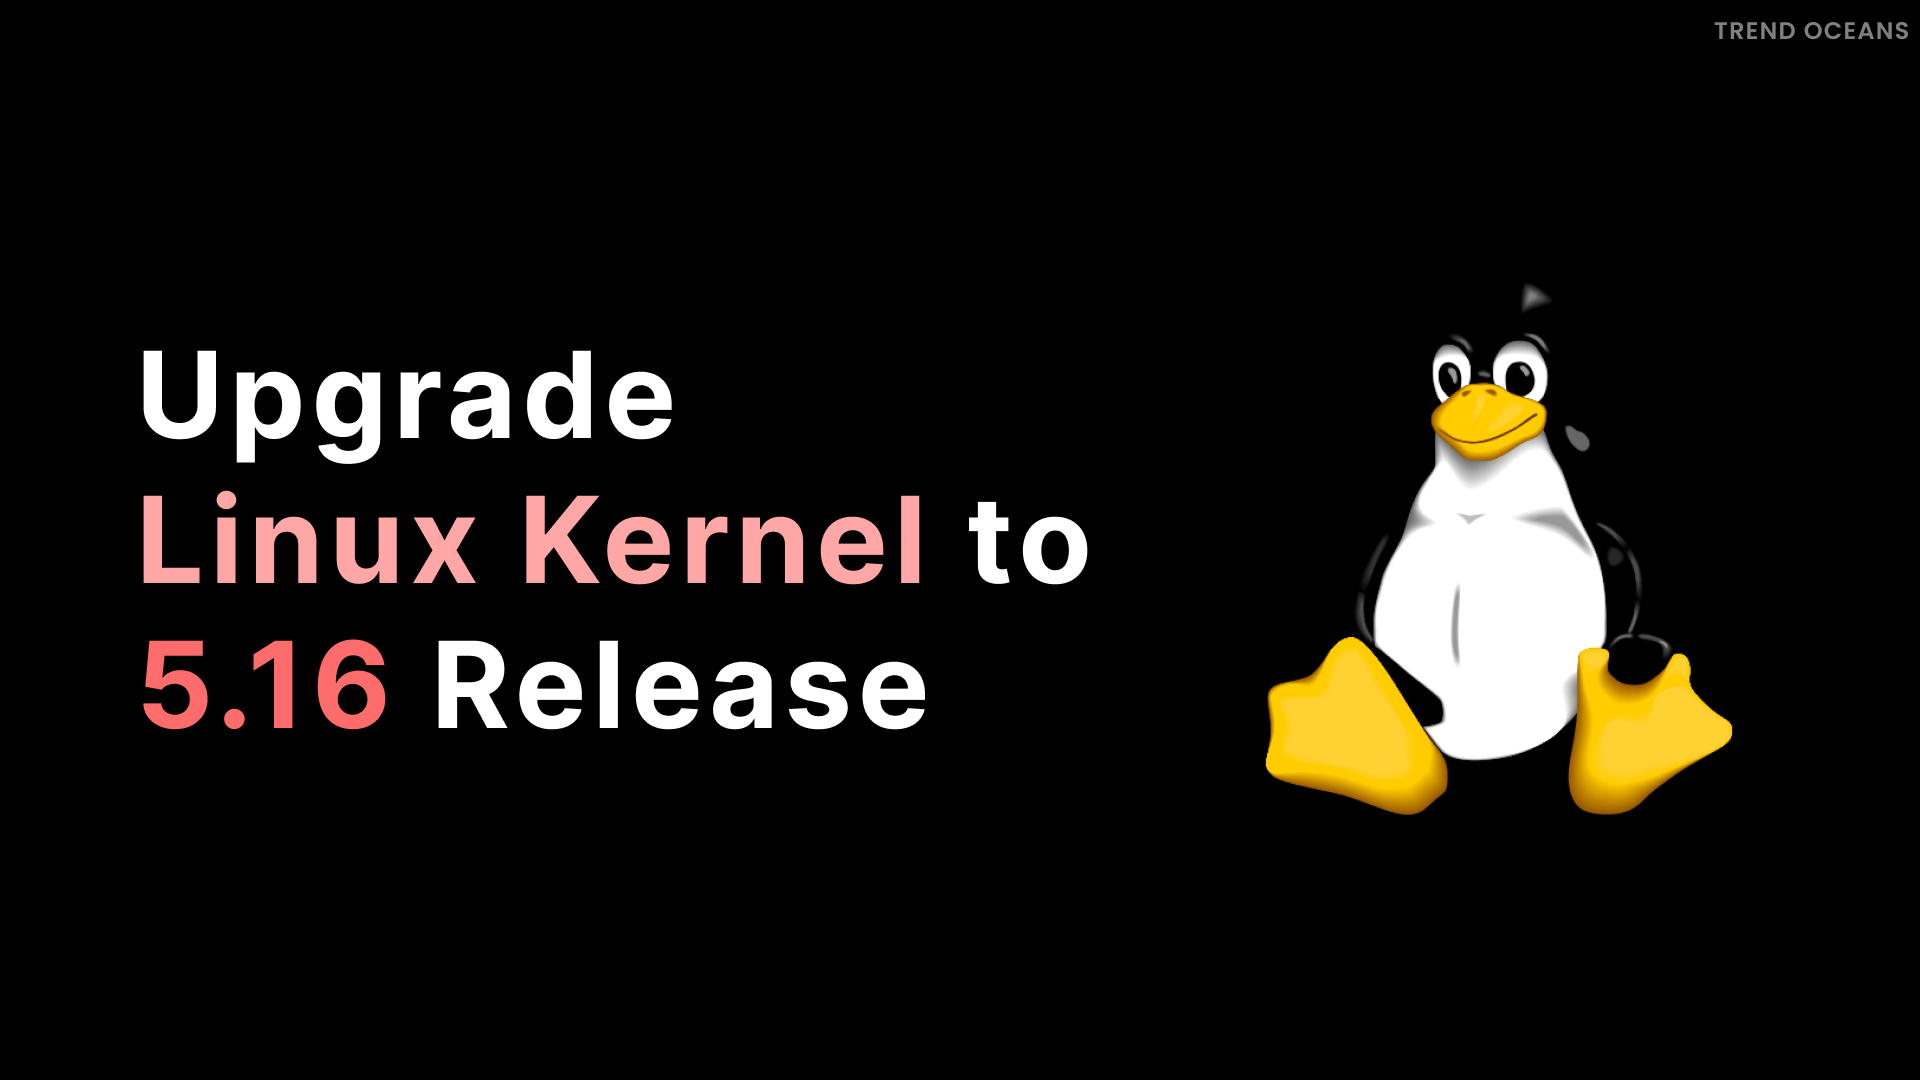 upgrade Linux Kernel to 5.16 Release